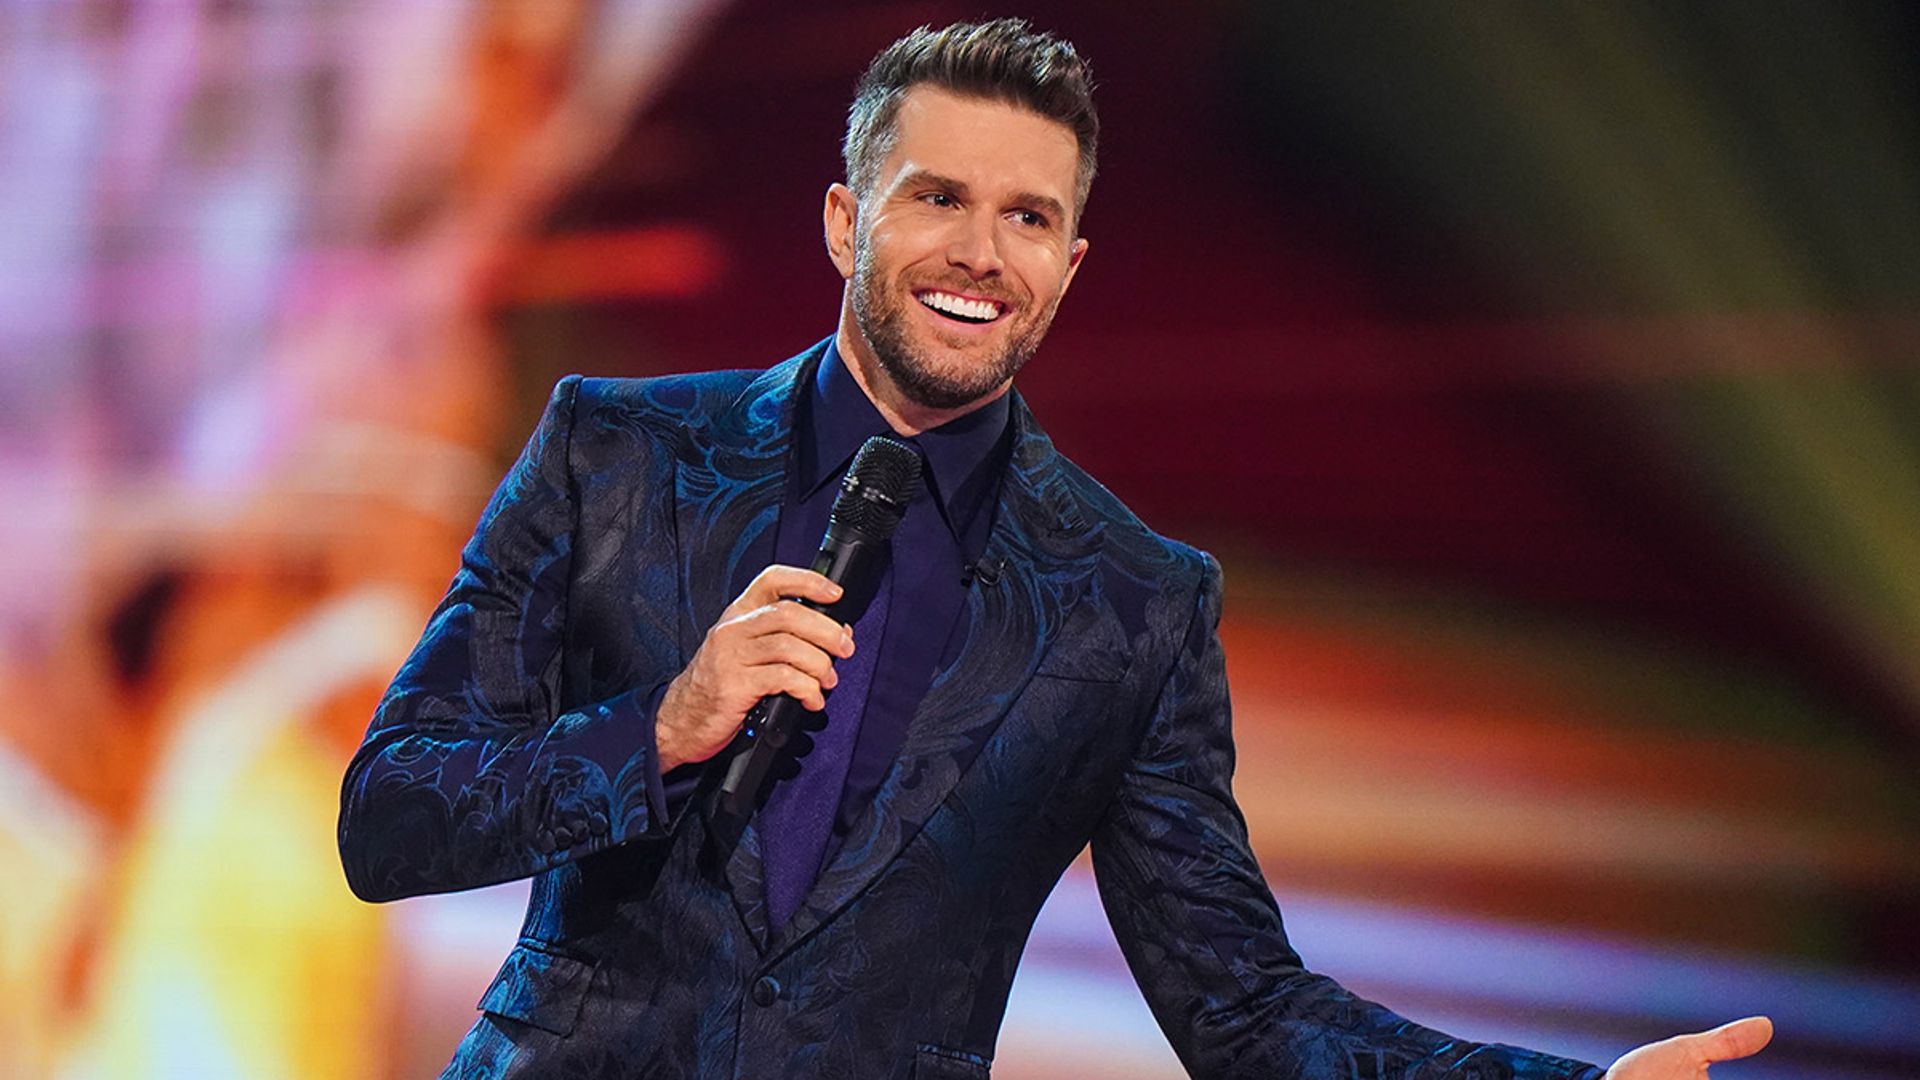 The Masked Singer's Joel Dommett shares new clue on celebrity identity – and it involves the judges